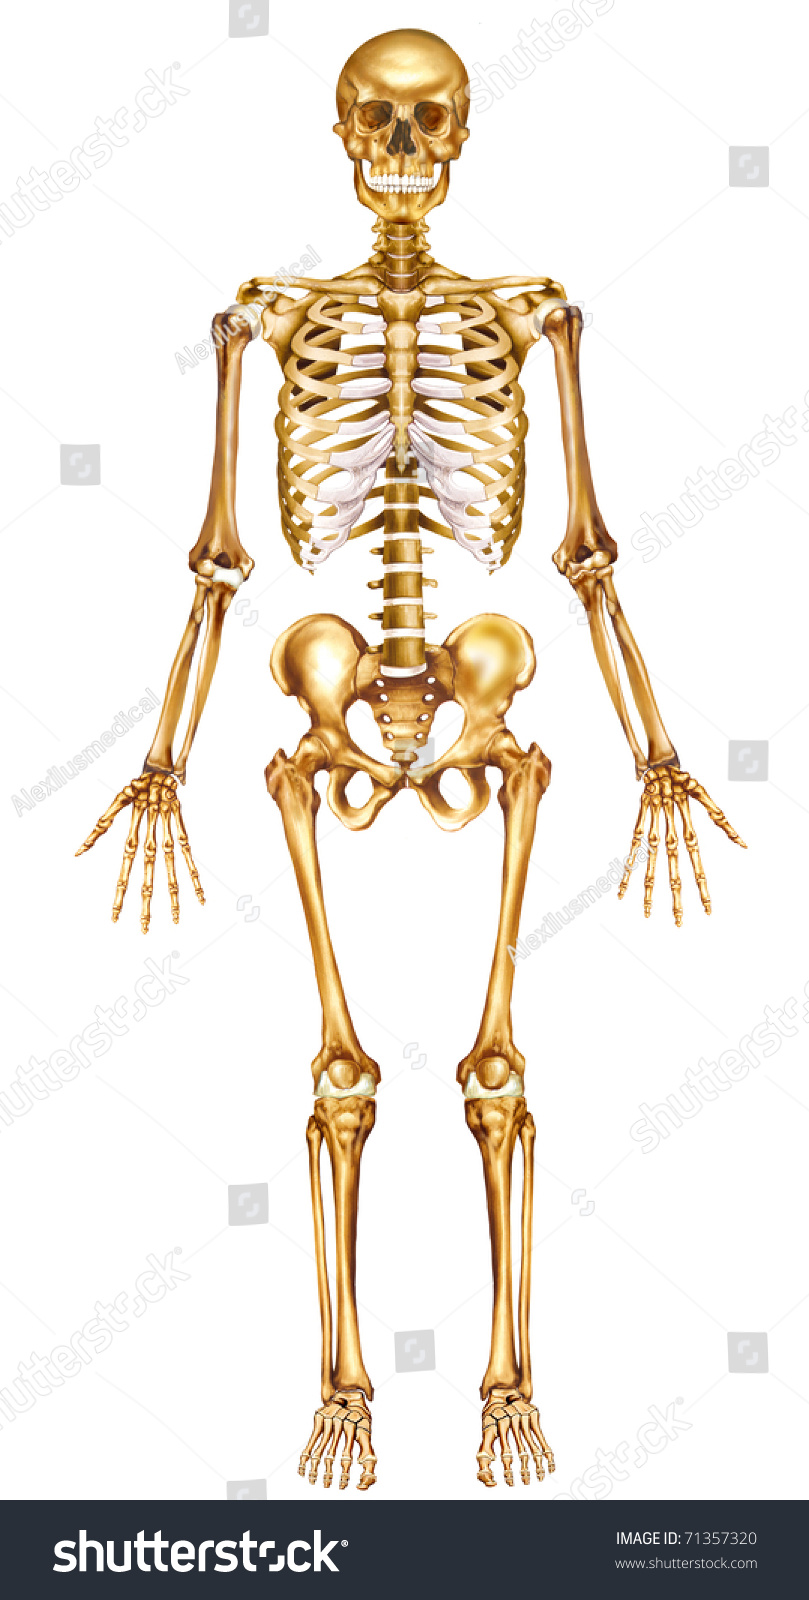 Illustration With Front View Of The Human Skeleton 71357320